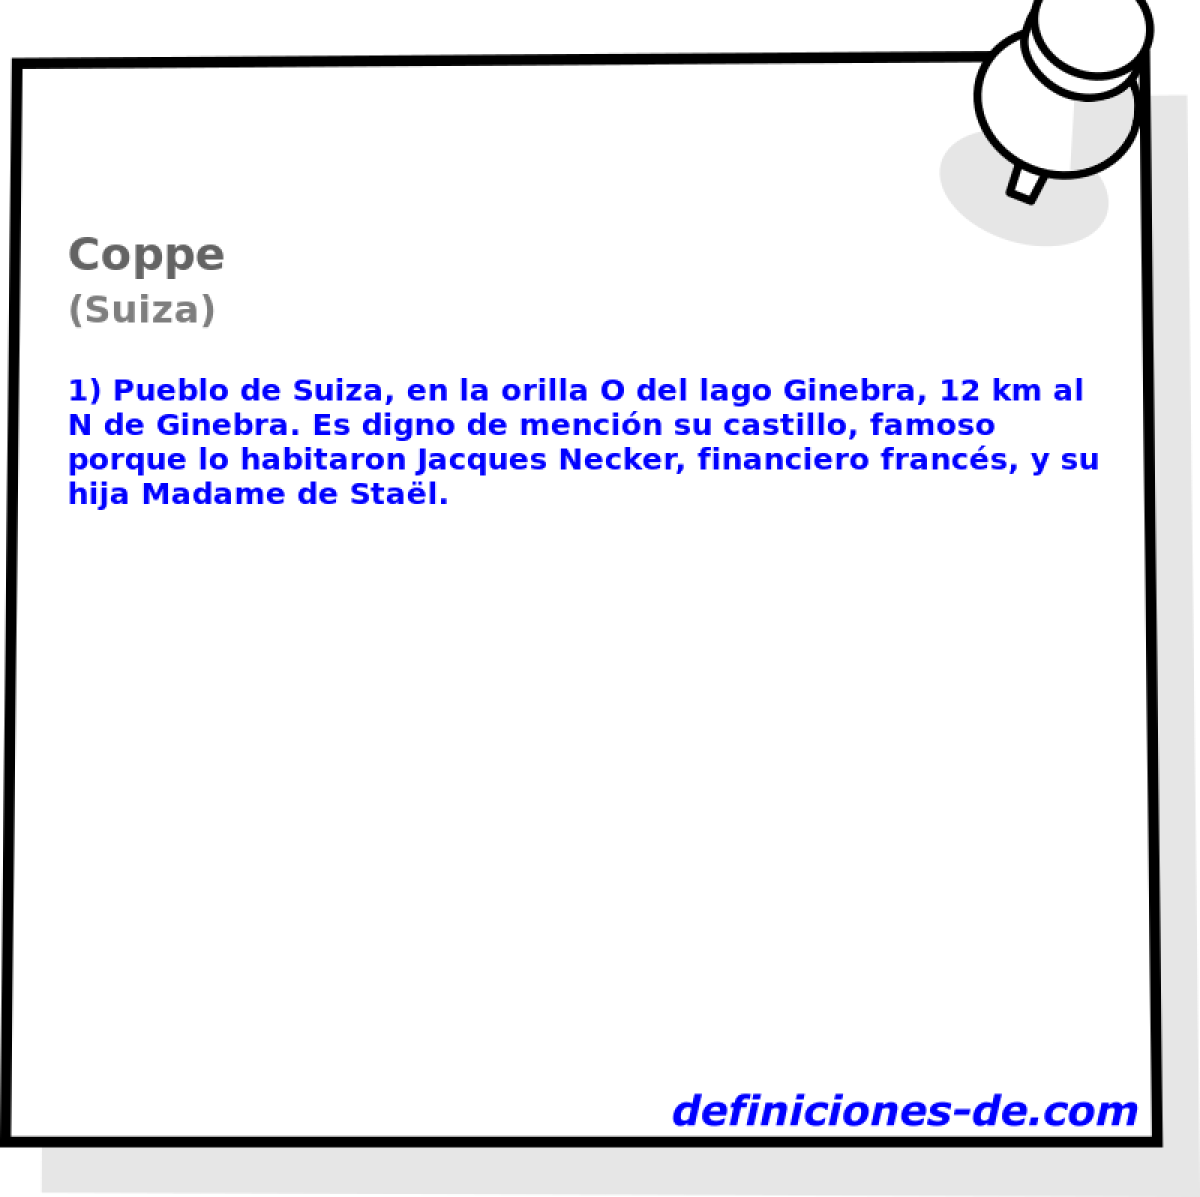 Coppe (Suiza)